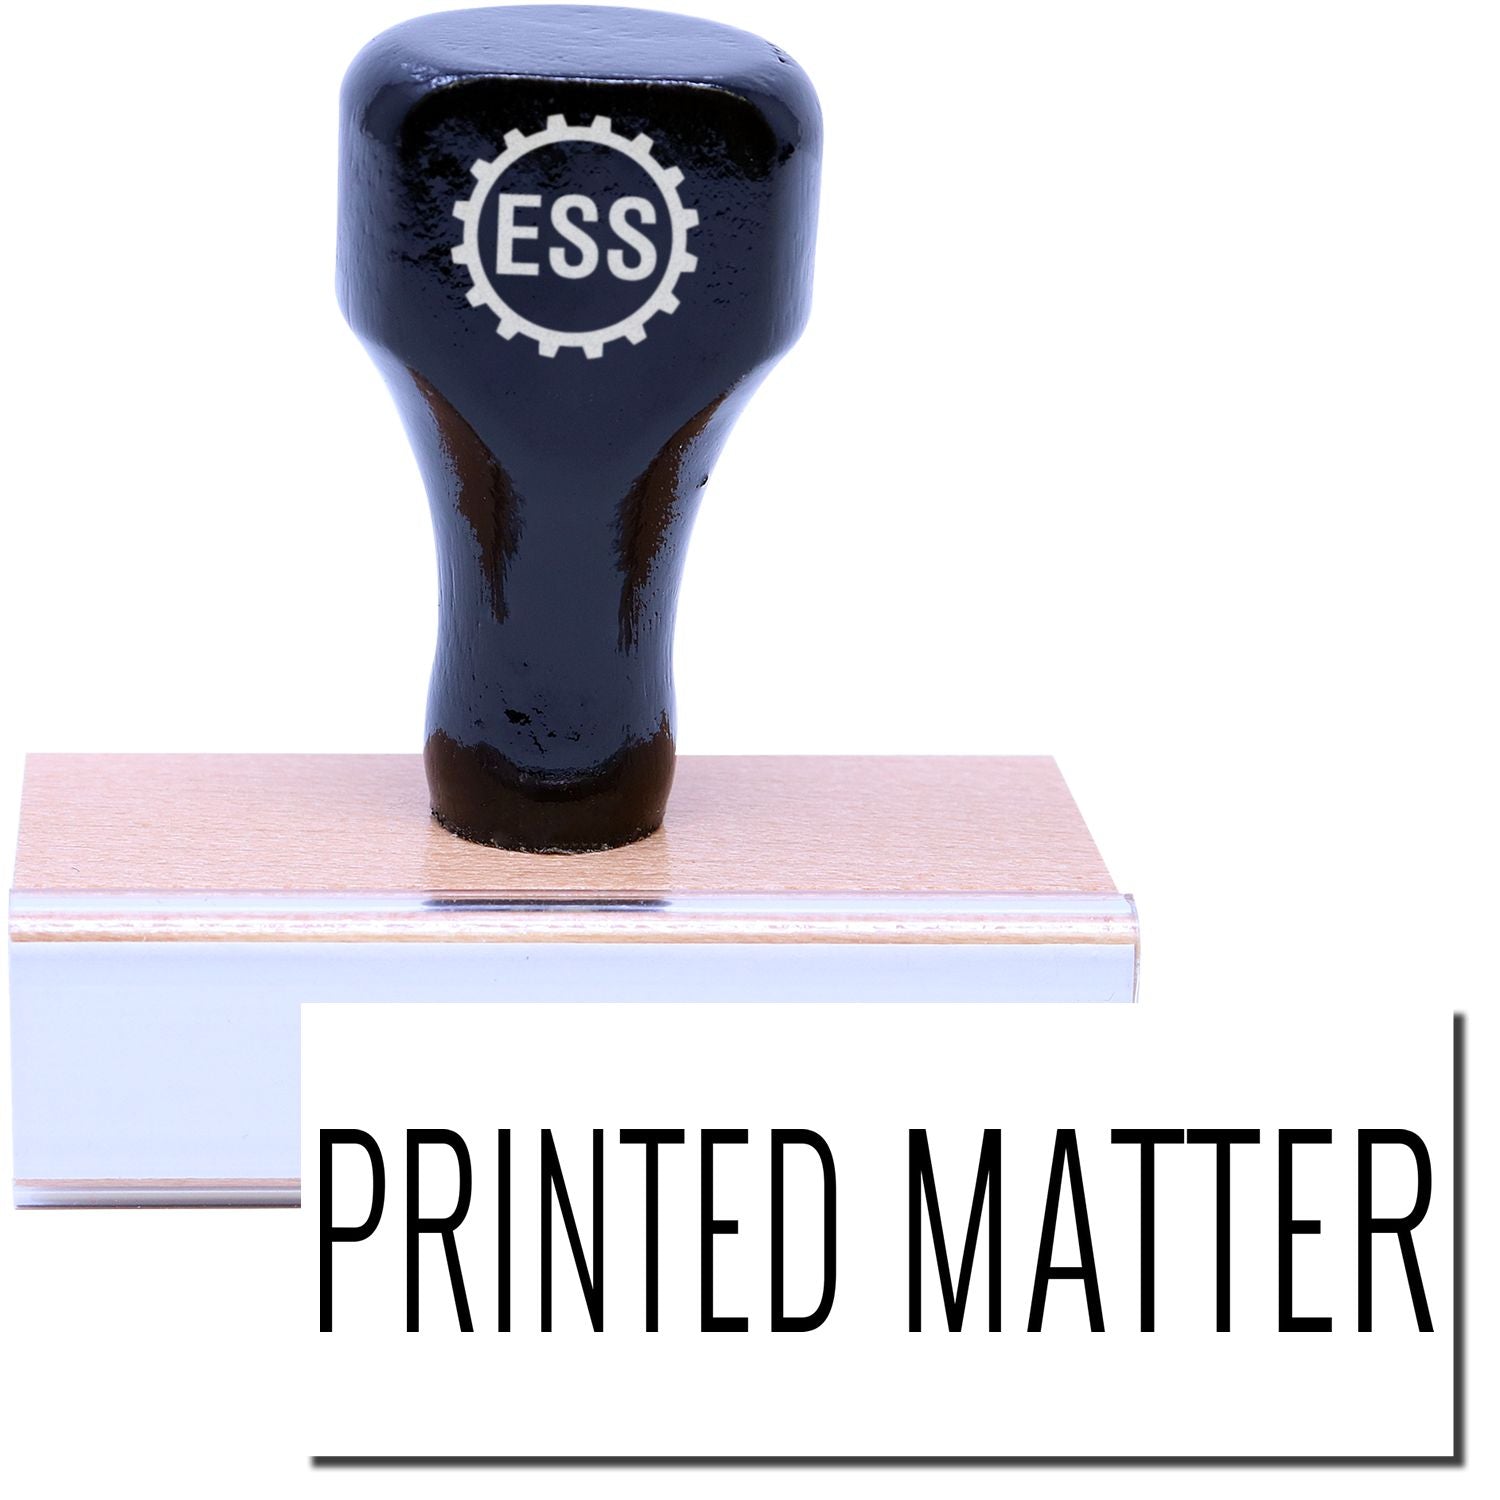 A stock office rubber stamp with a stamped image showing how the text "PRINTED MATTER" is displayed after stamping.